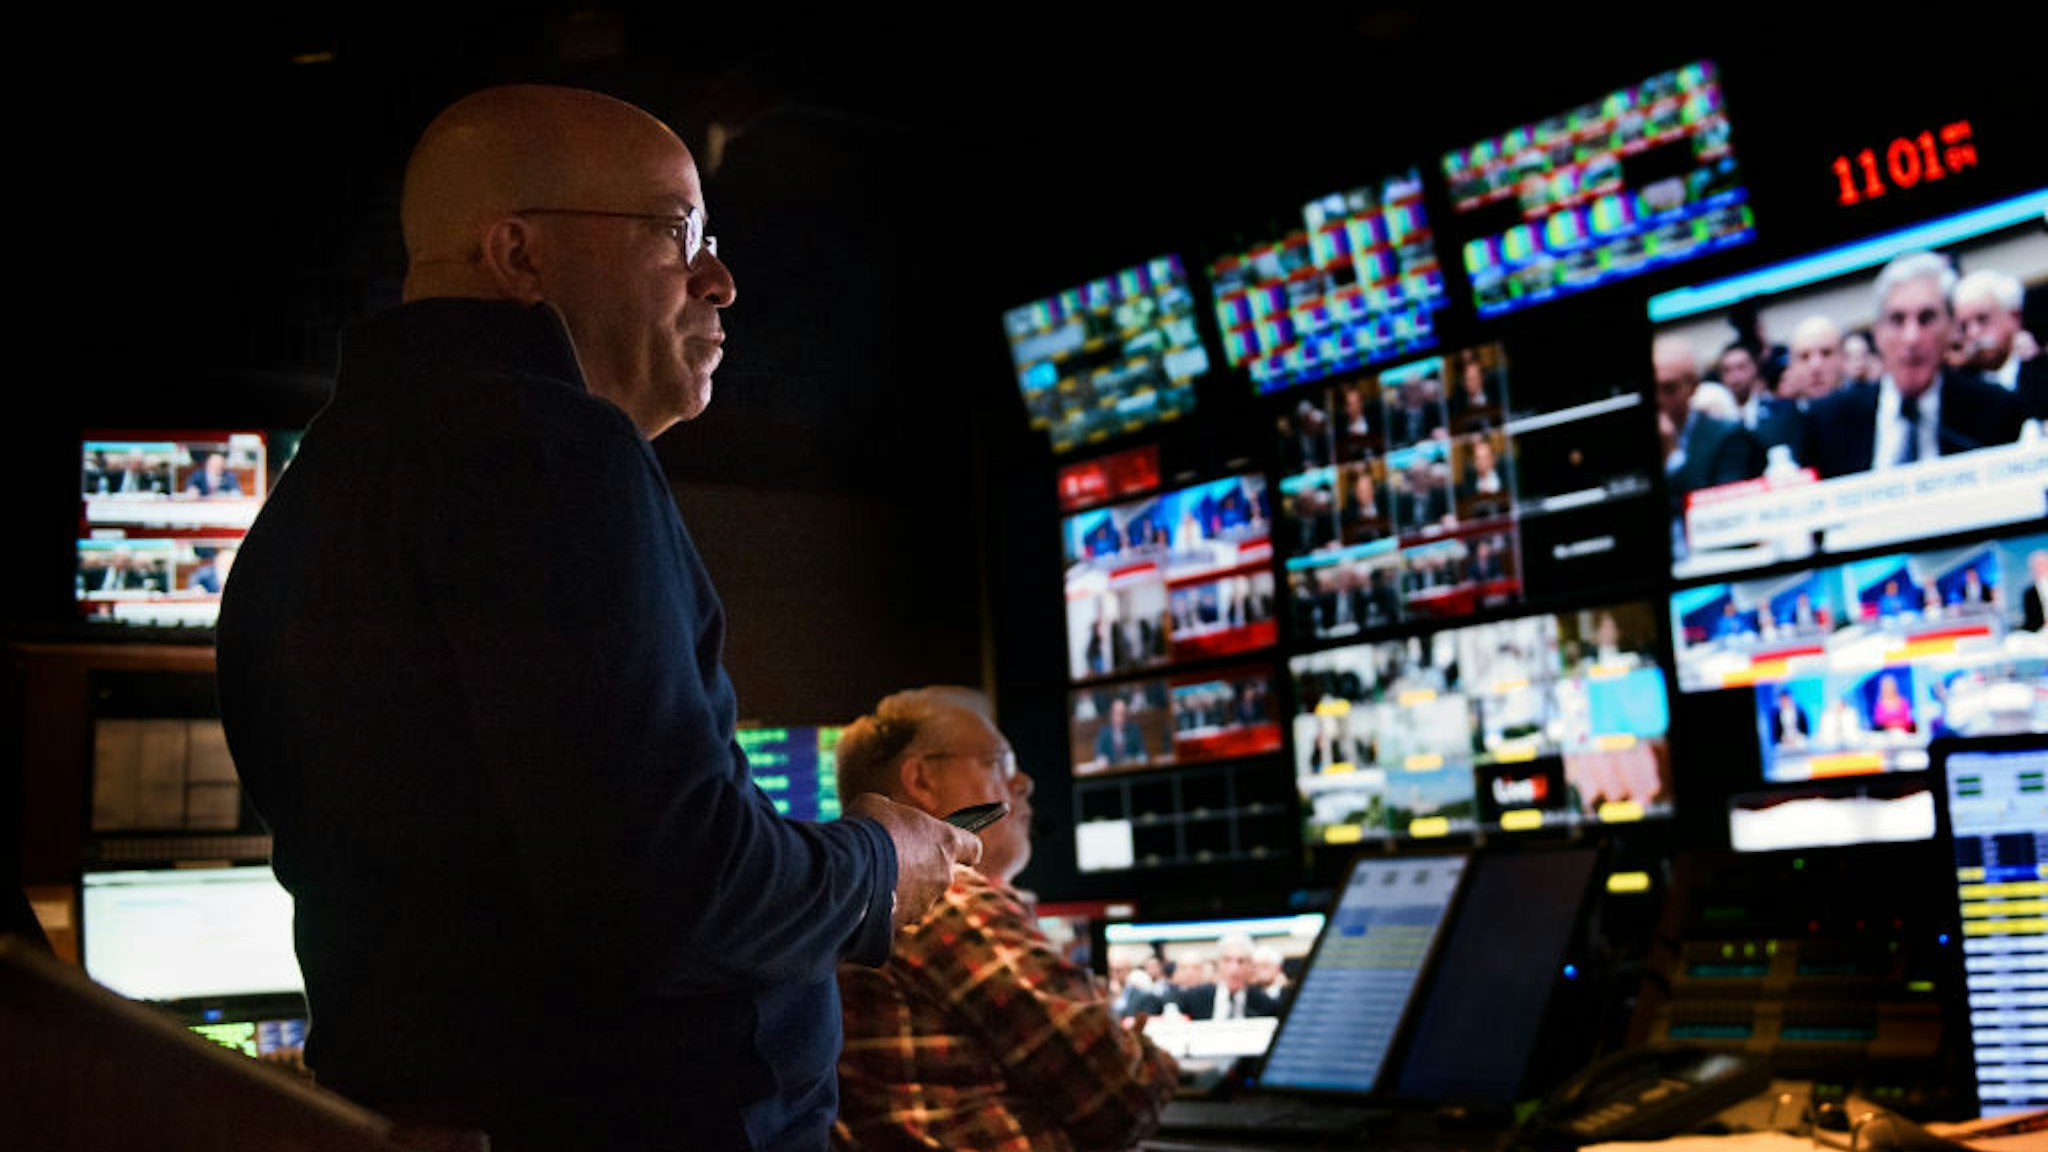 CNN President Jeff Zucker, in the network control room during the Mueller hearings, on July, 22, 2019 in Washington, DC. (Photo by Bill O'Leary/The Washington Post)